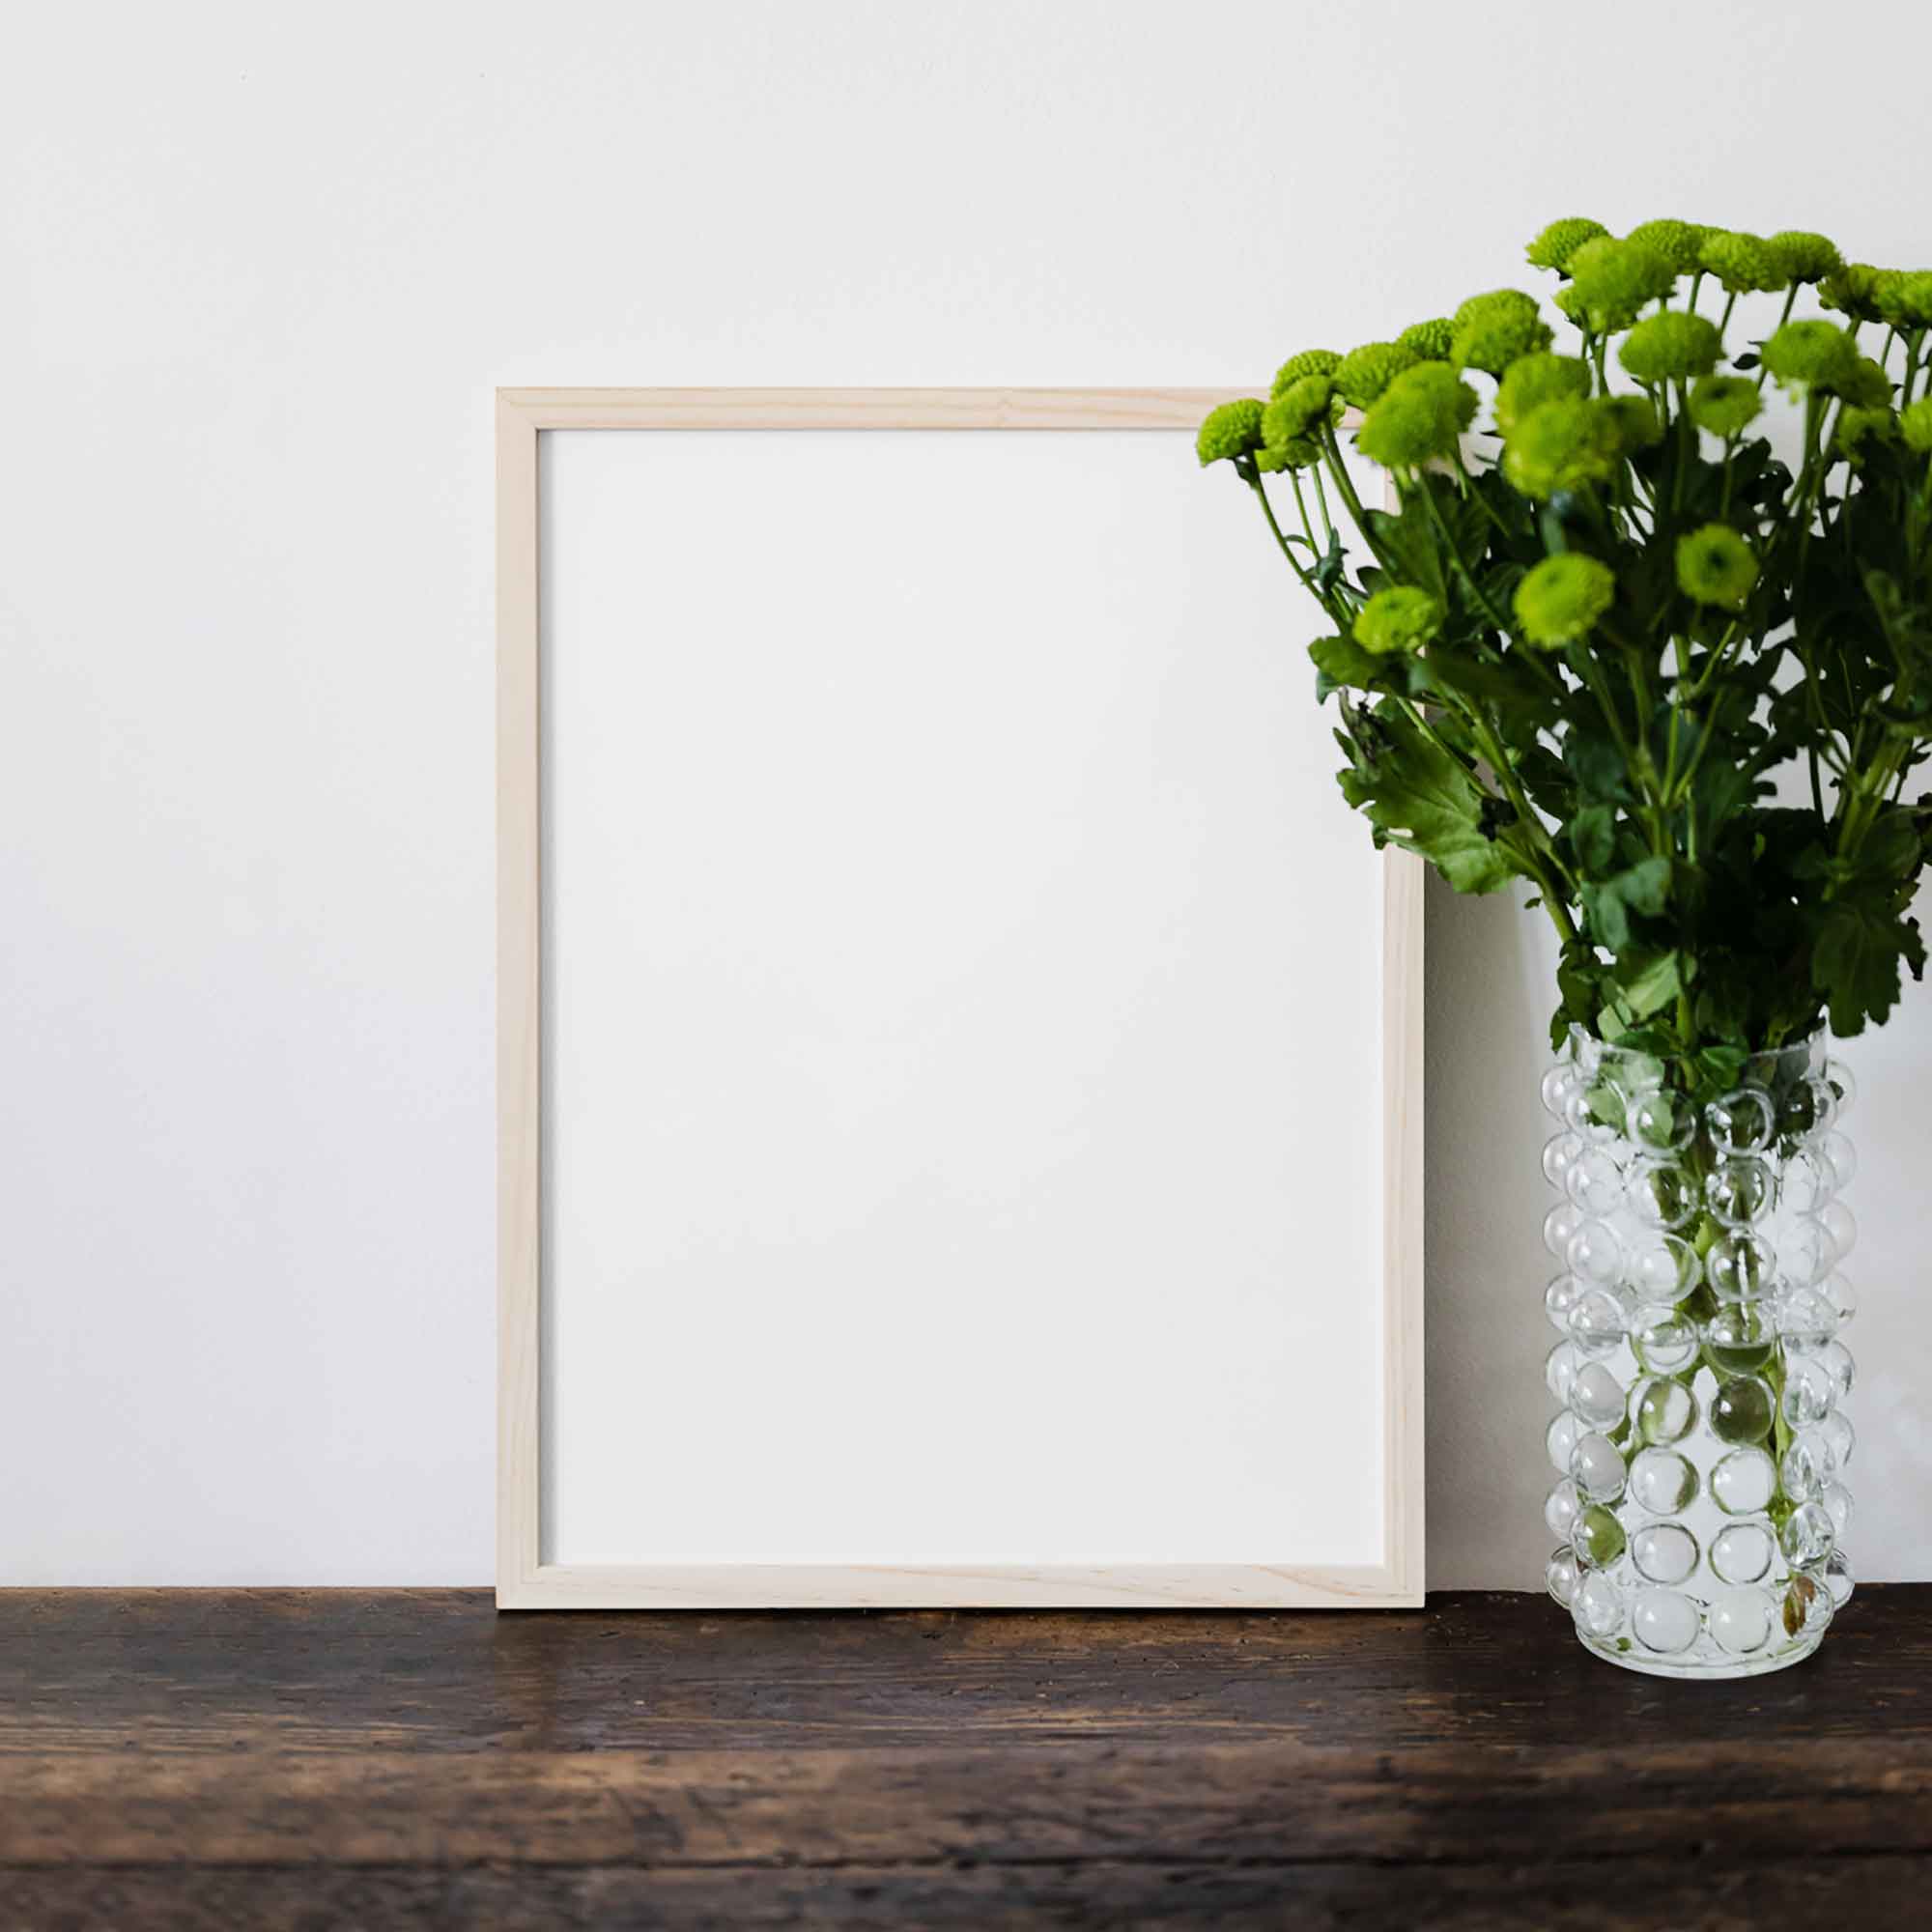 Free Poster Frame Against Wall Mockup